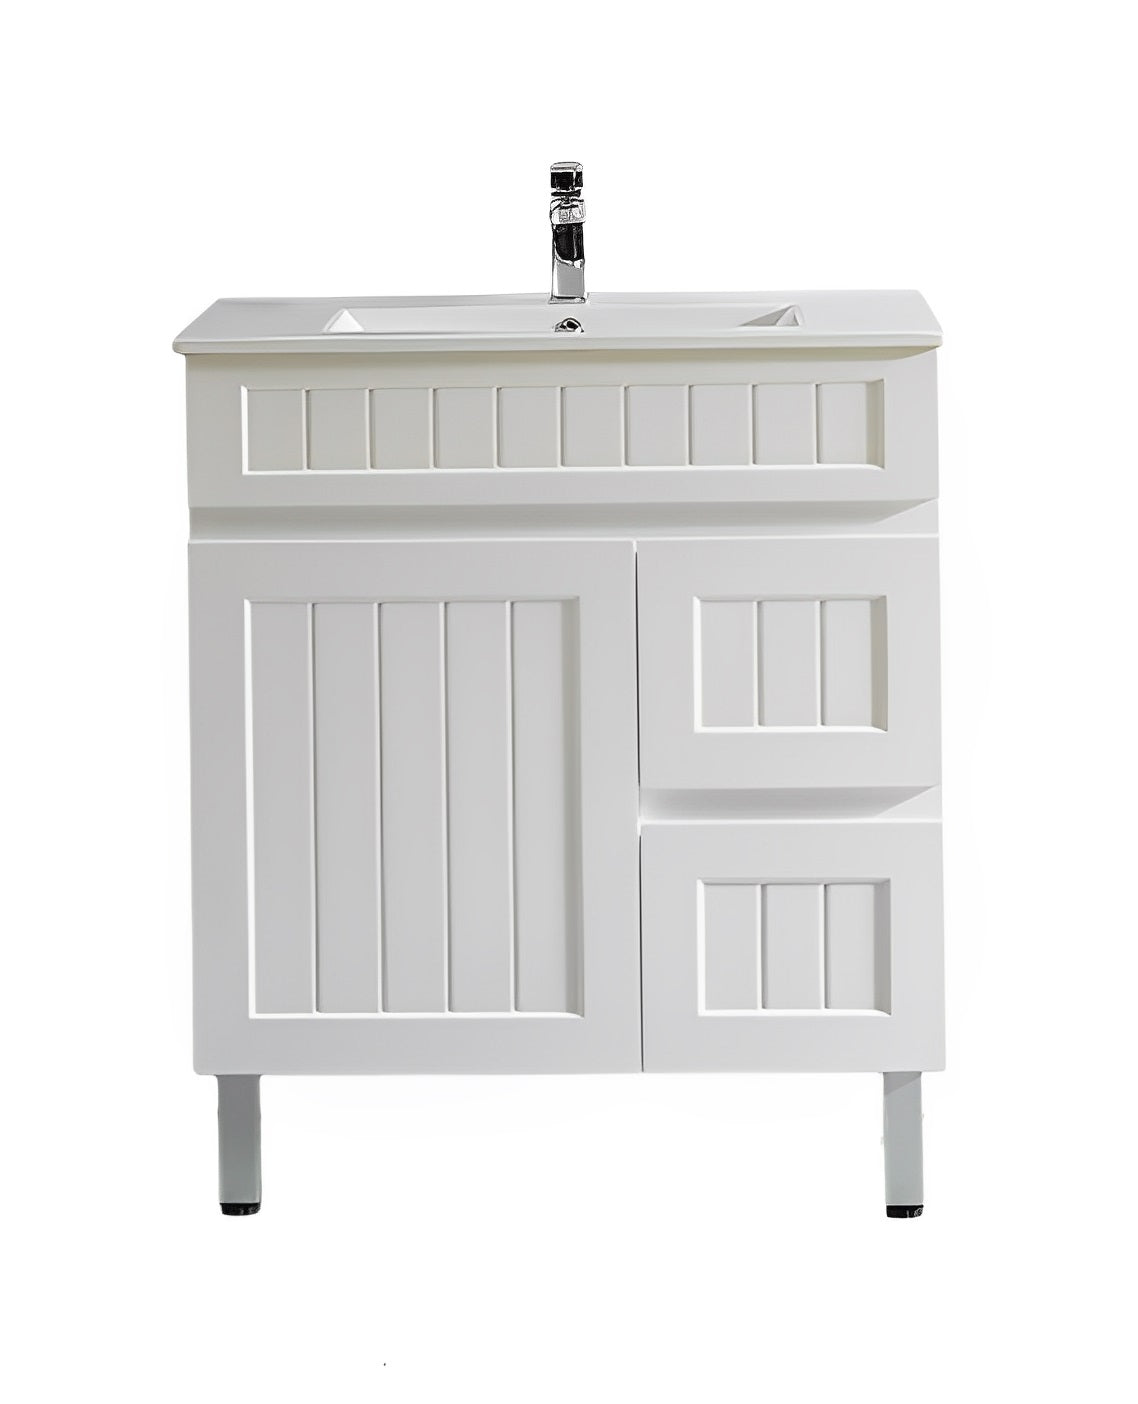 POSEIDON ACACIA SHAKER MATTE WHITE 750MM FLOOR STANDING VANITY (AVAILABLE IN LEFT HAND DRAWER AND RIGHT HAND DRAWER)